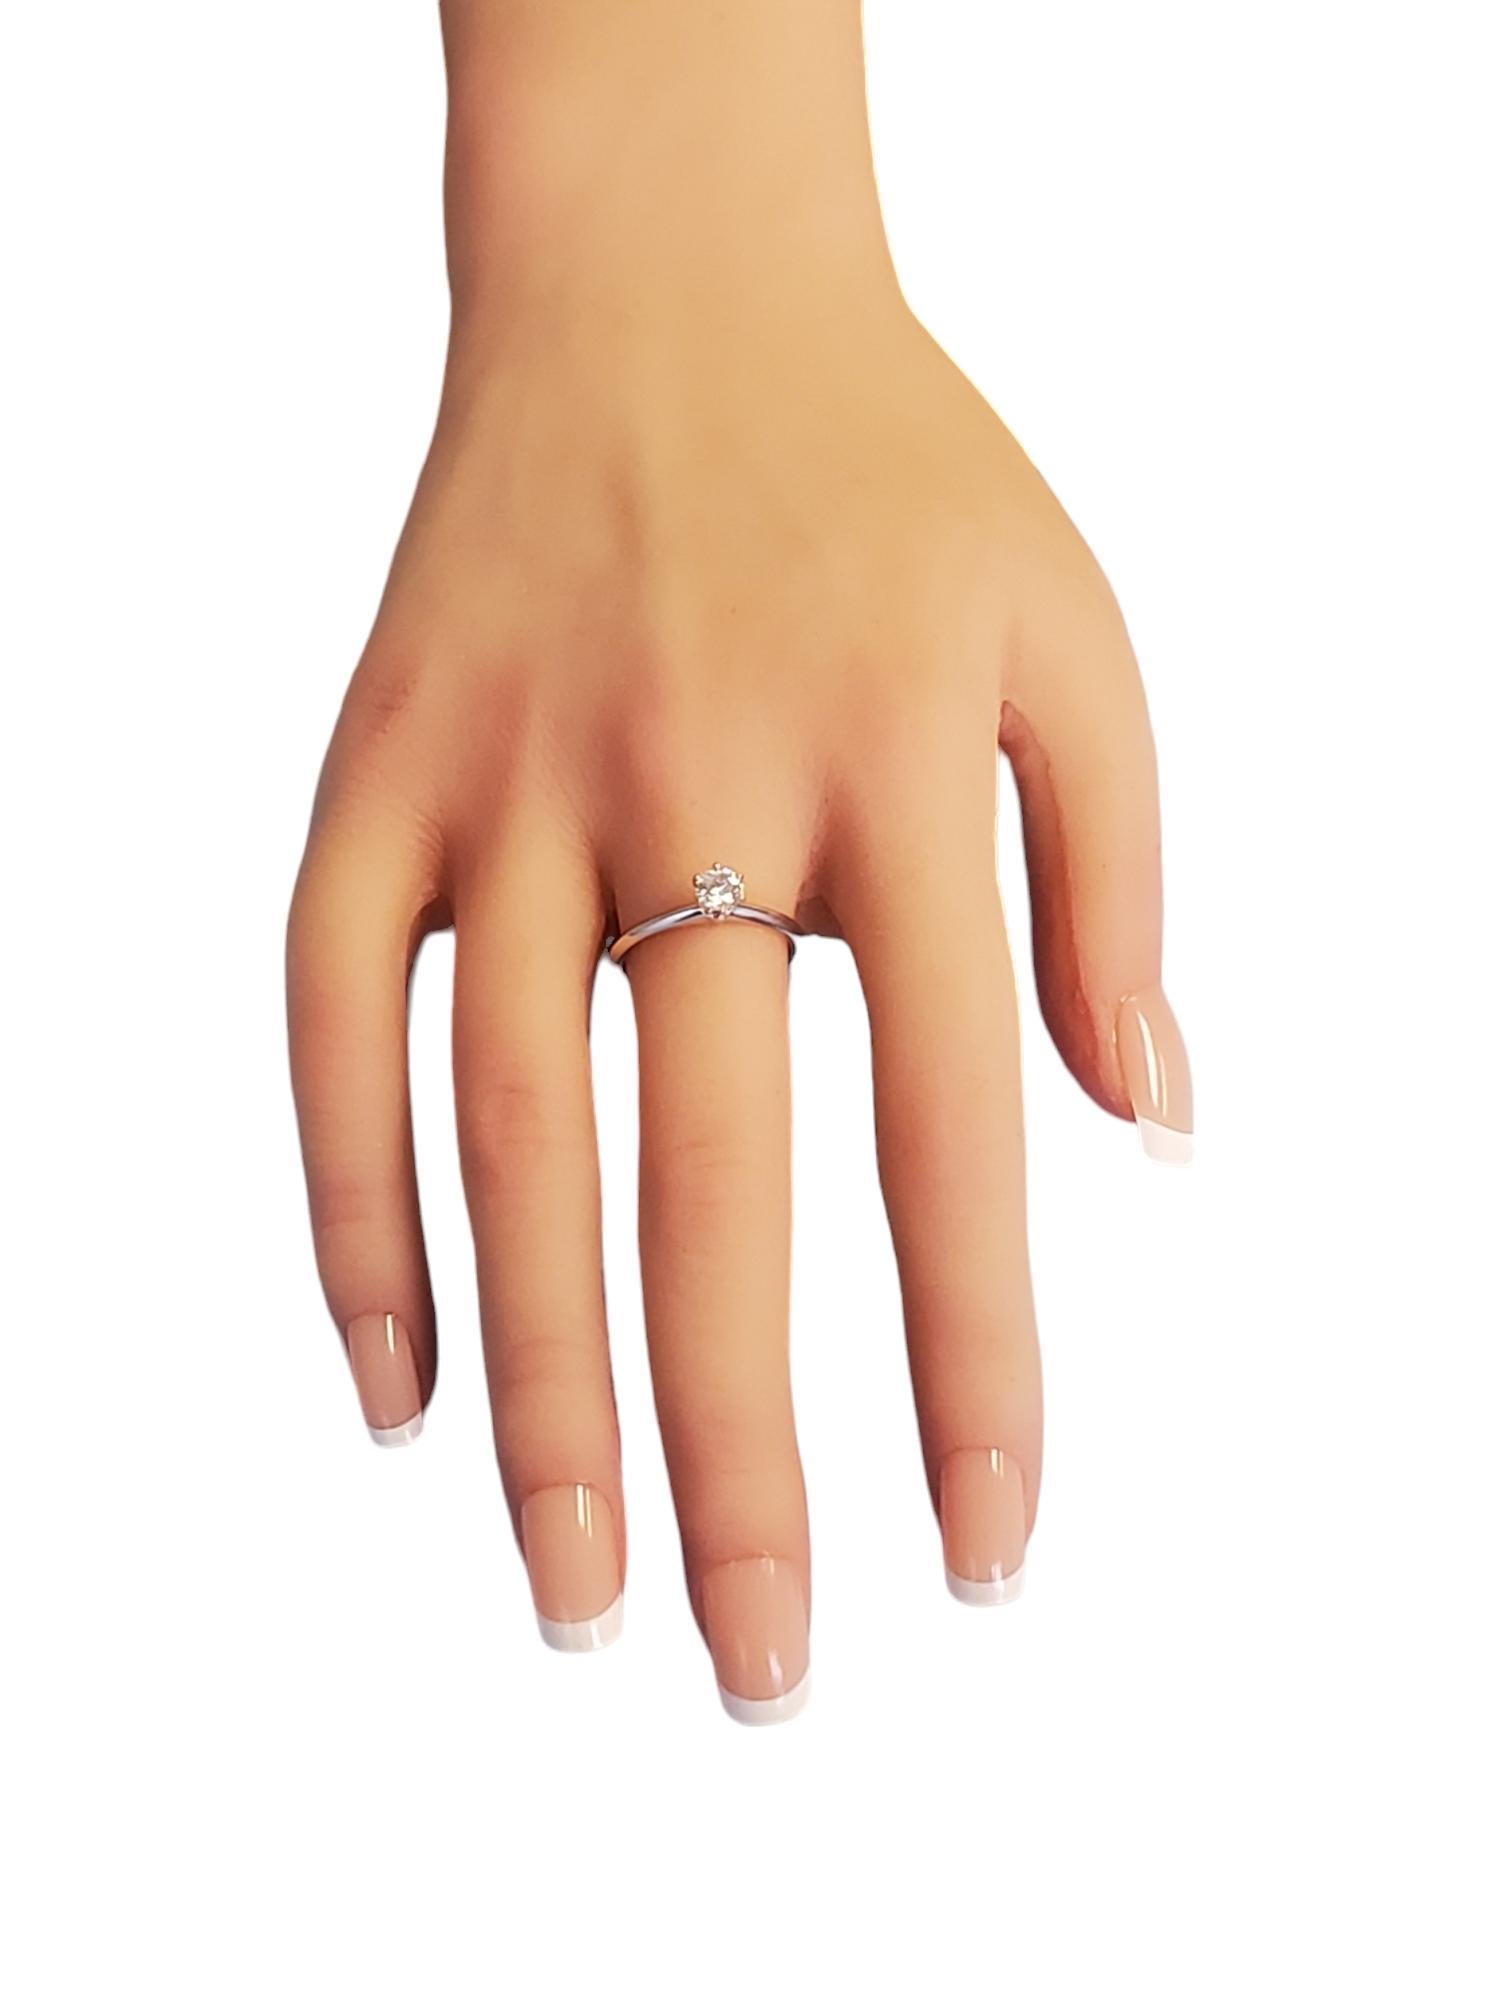 Tiffany & Co. Diamond Solitaire Platinum Engagement Ring .46ct VS1 Round For Sale 2